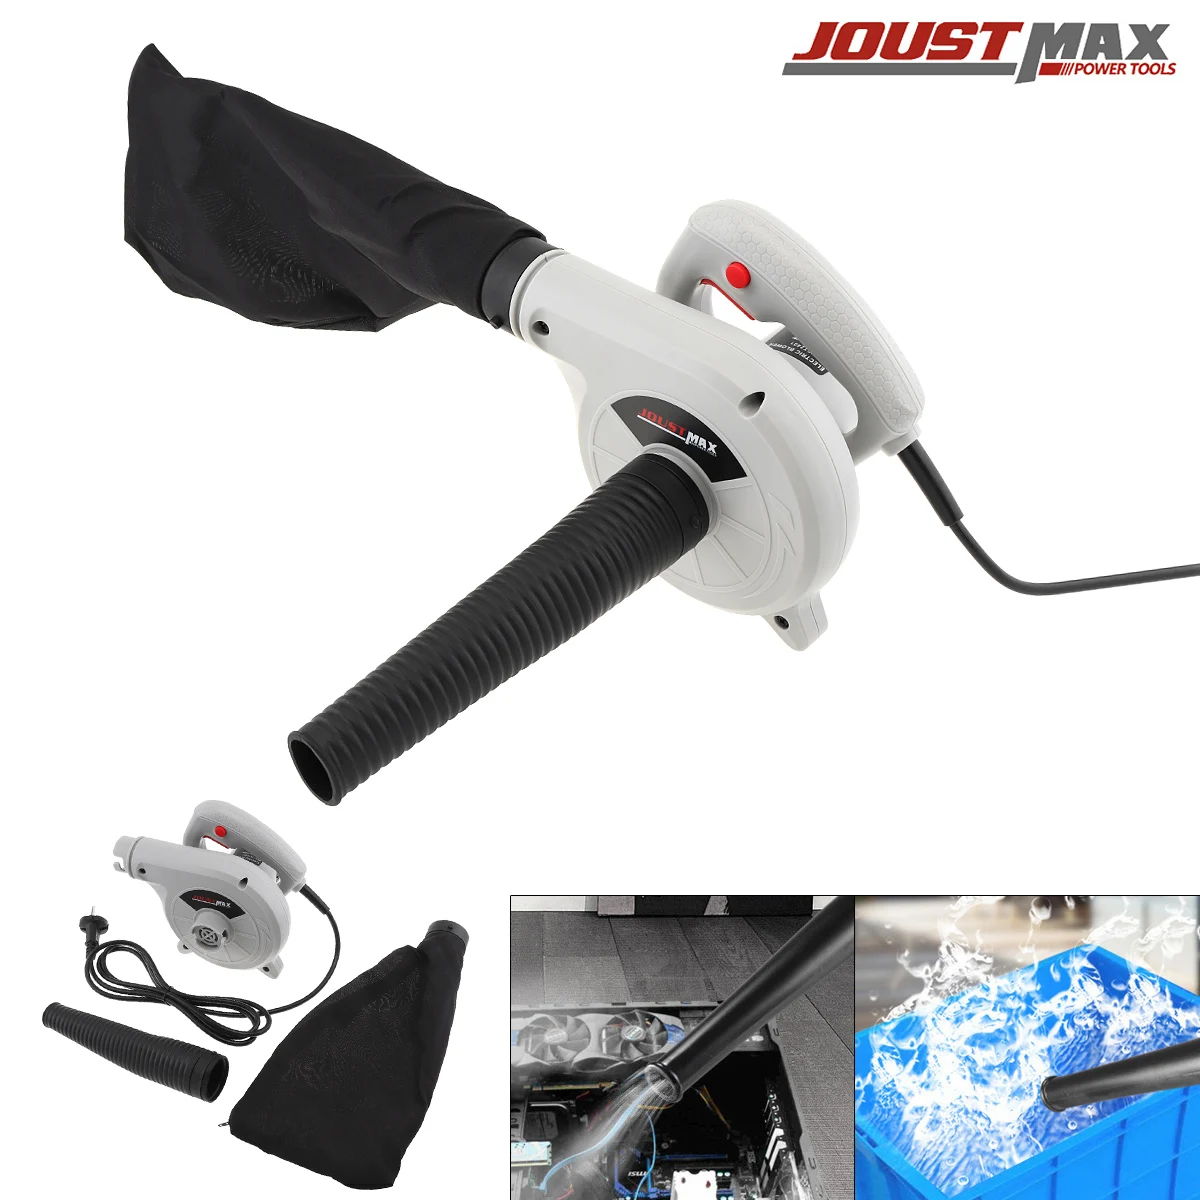 

600W Multifunctional Portable Electric Hand Operated Blower with Suction Head and Collecting Bag for Removing Dust